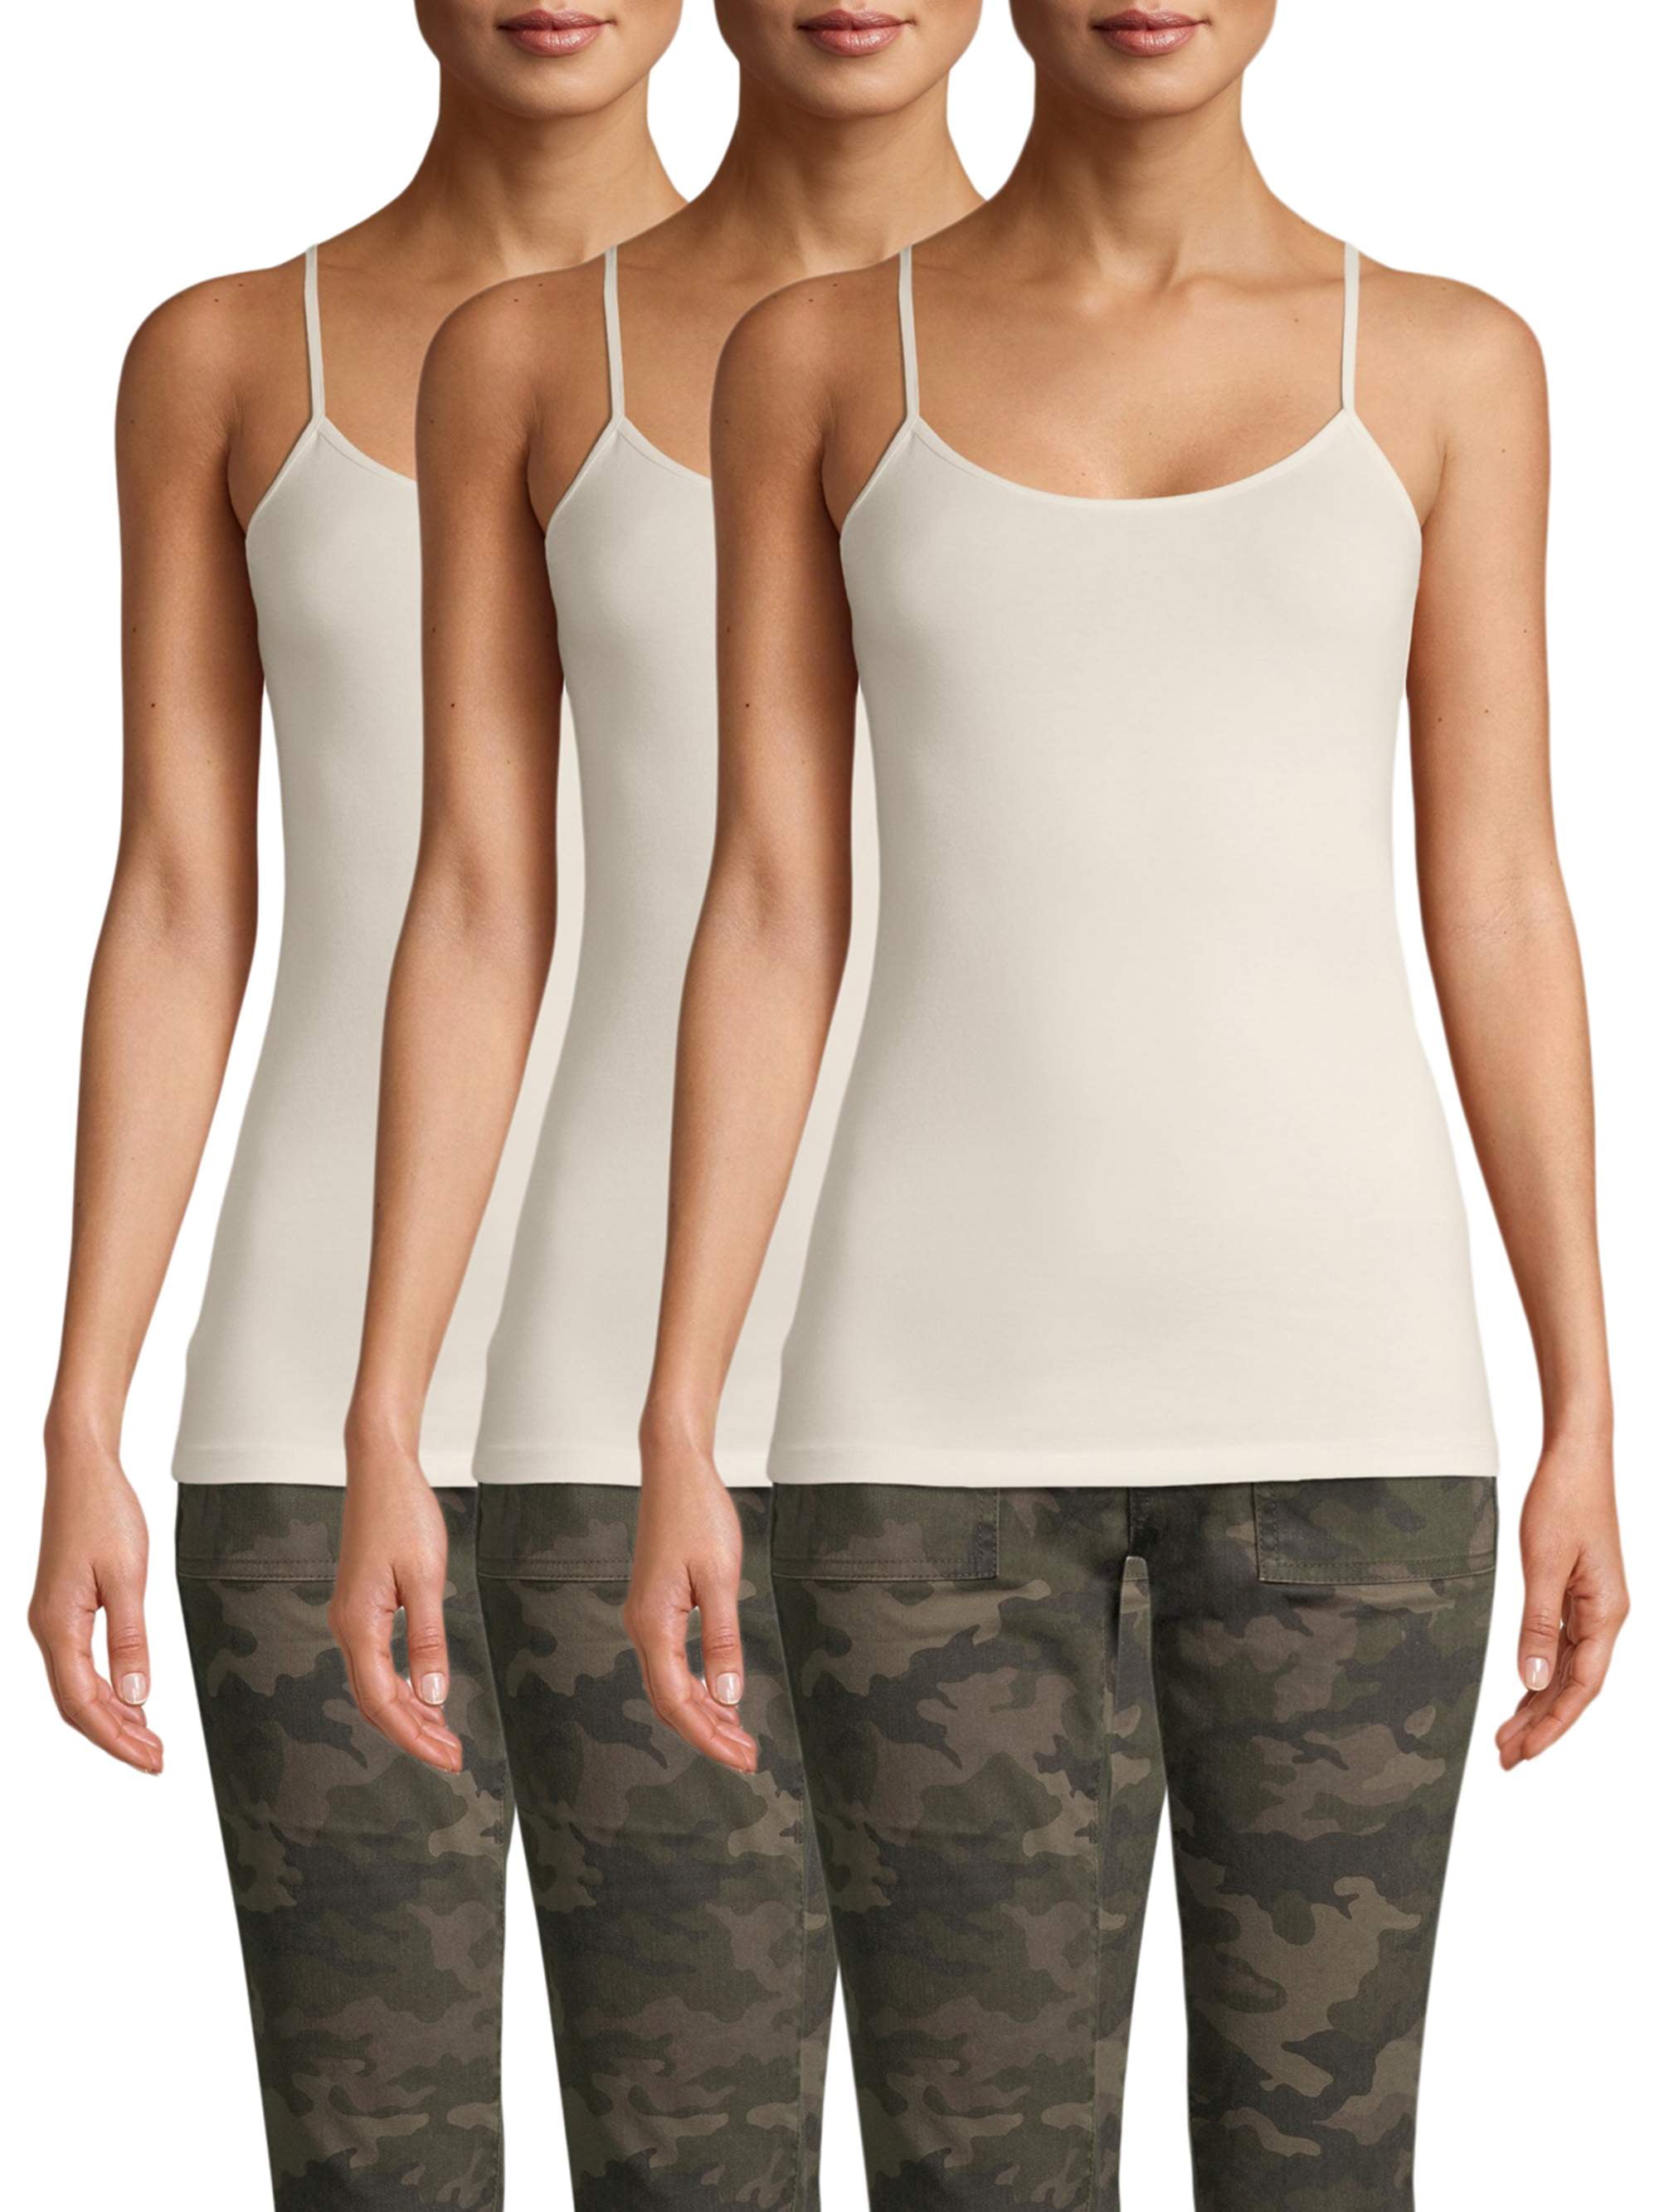 BANG BANG Womens Seamless Shapewear Camisole Tank Tops with Adjustable Straps 1-3 Pack